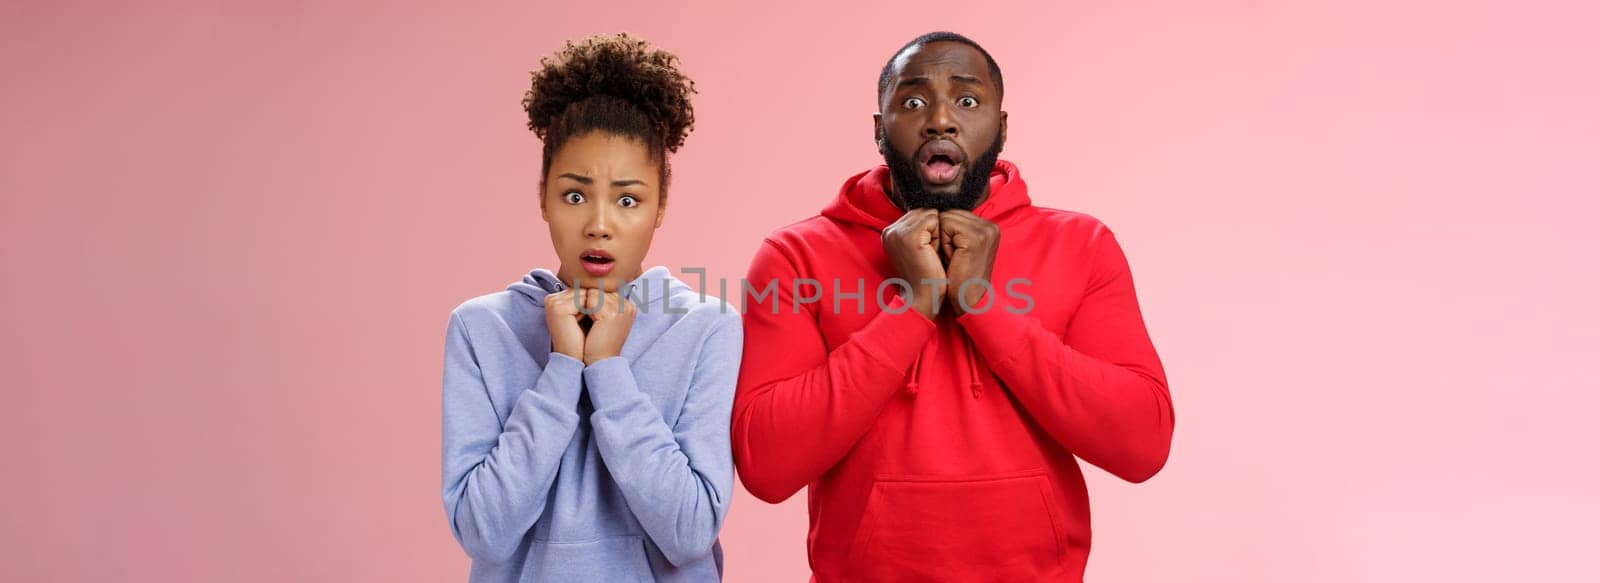 Lifestyle. Upset worried two siblings watching together scary disturbing horror movie gasping frowning cringing shock intense emotions press hands chest widen eyes terrified standing nervous pink background.